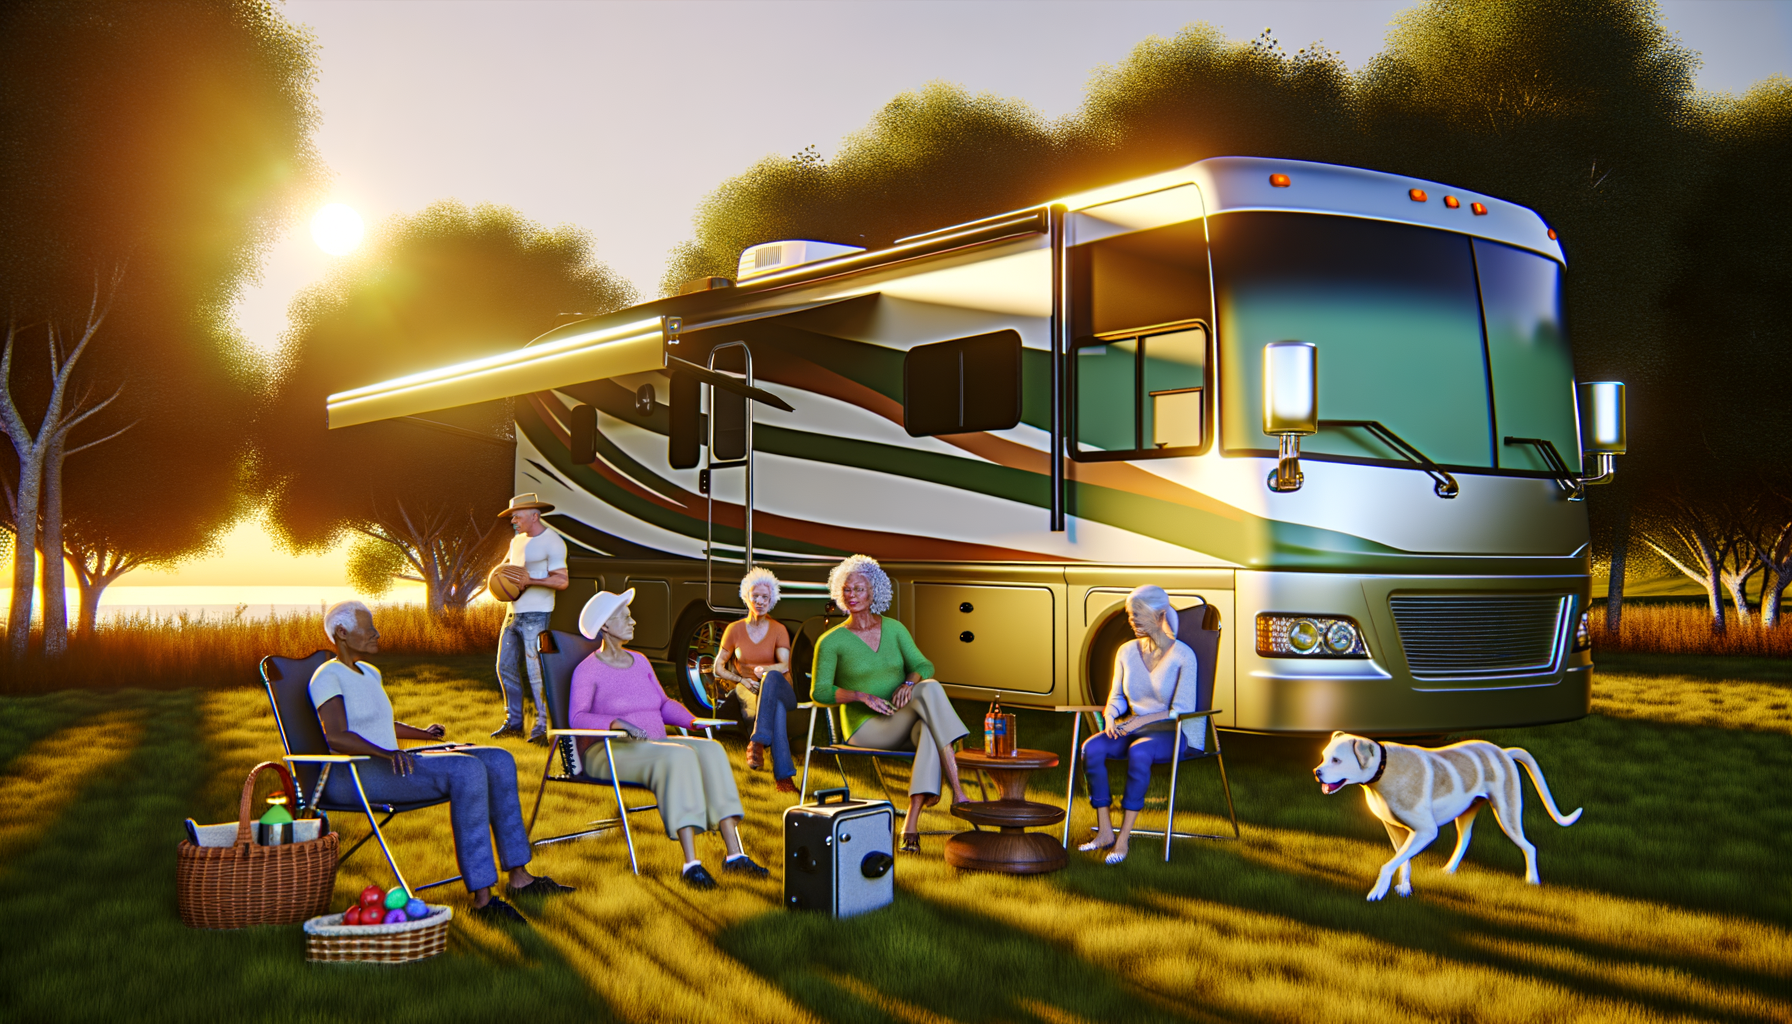 RV Living for Seniors: The Road to Freedom and Community